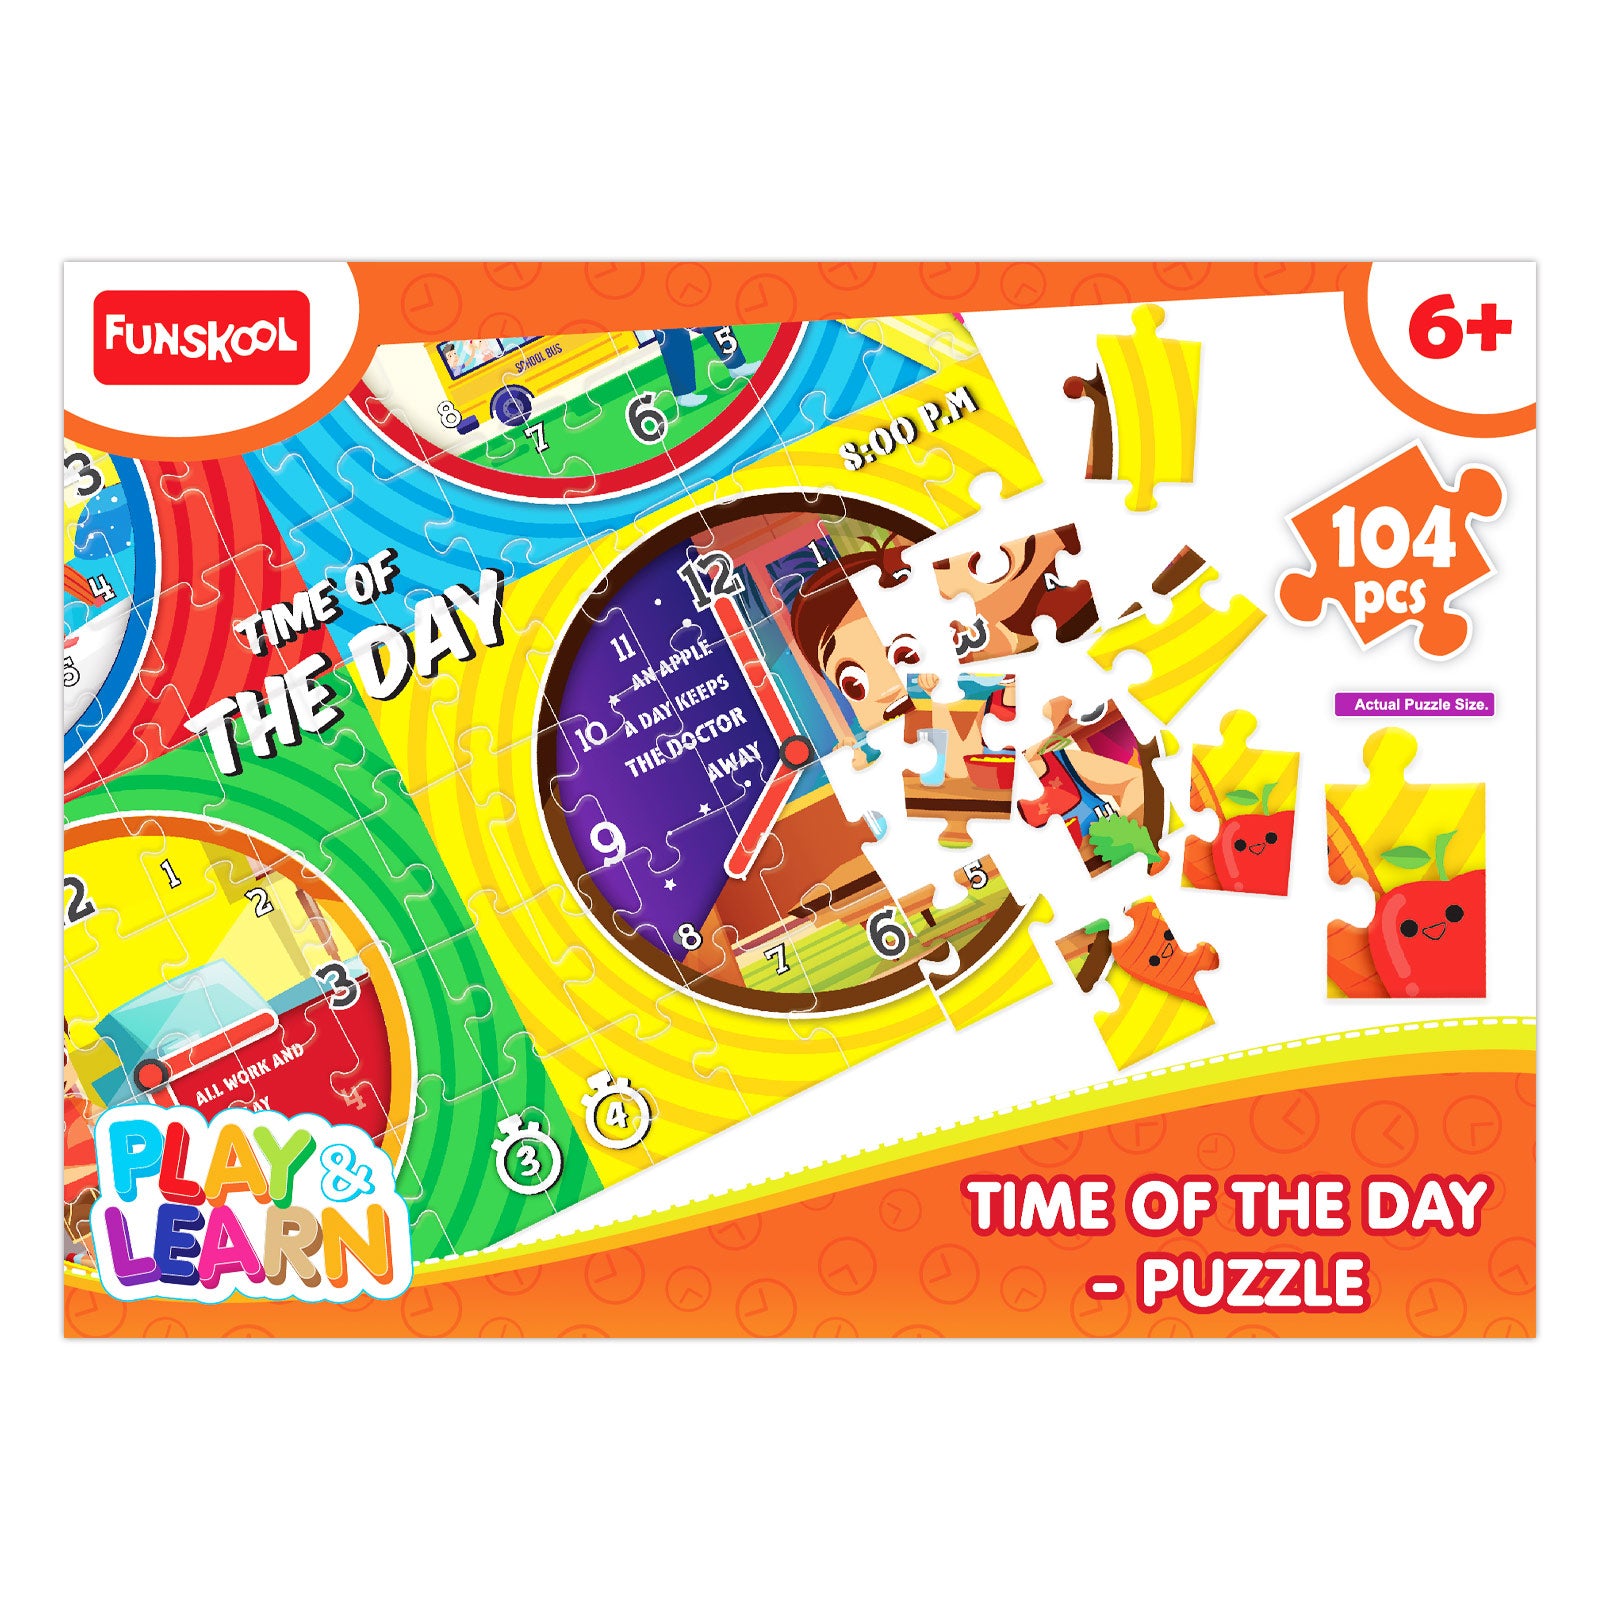  FUNSKOOL Time of the Day Puzzle